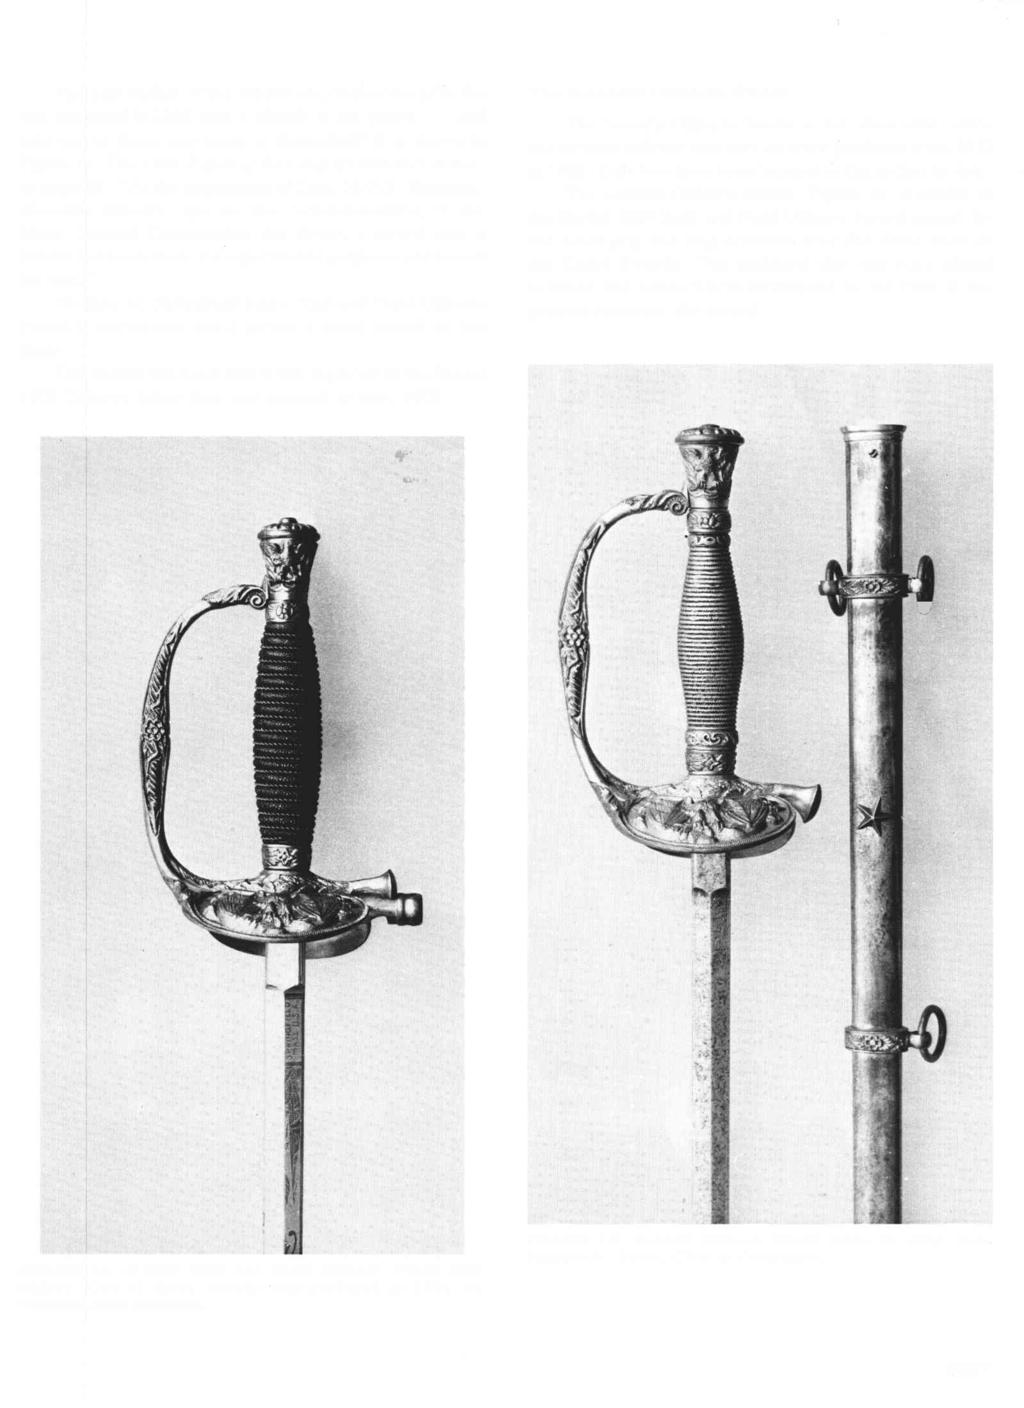 The only variant of the MI860 sword discovered is the one produced in 1891 with a whistle in the guard... and only one of these was made at Springfield! It is shown in Figure 12.